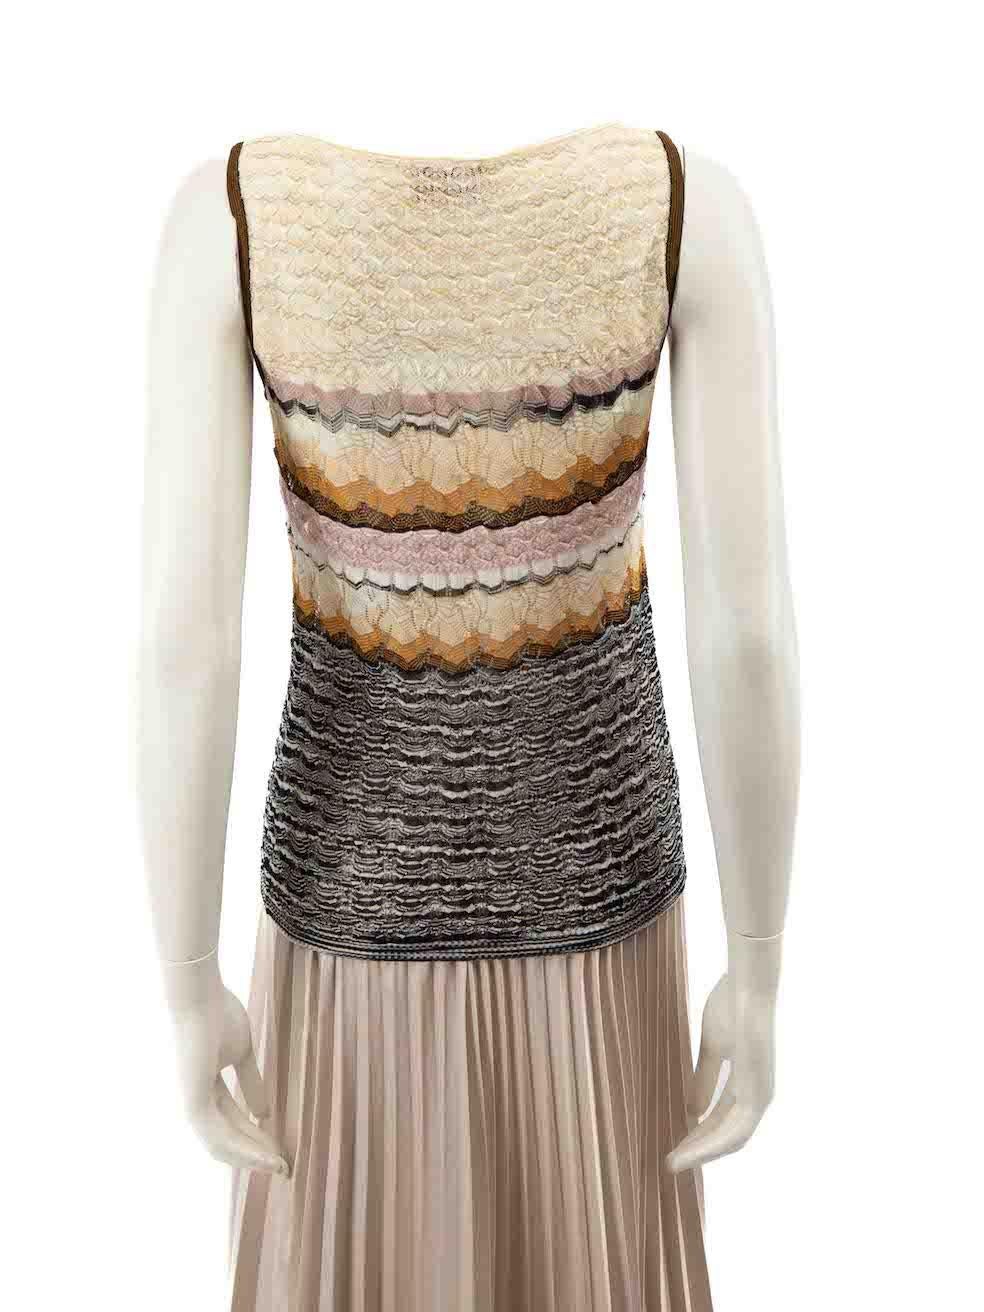 Missoni Striped Knitted Sleeveless Top Size M In Excellent Condition For Sale In London, GB